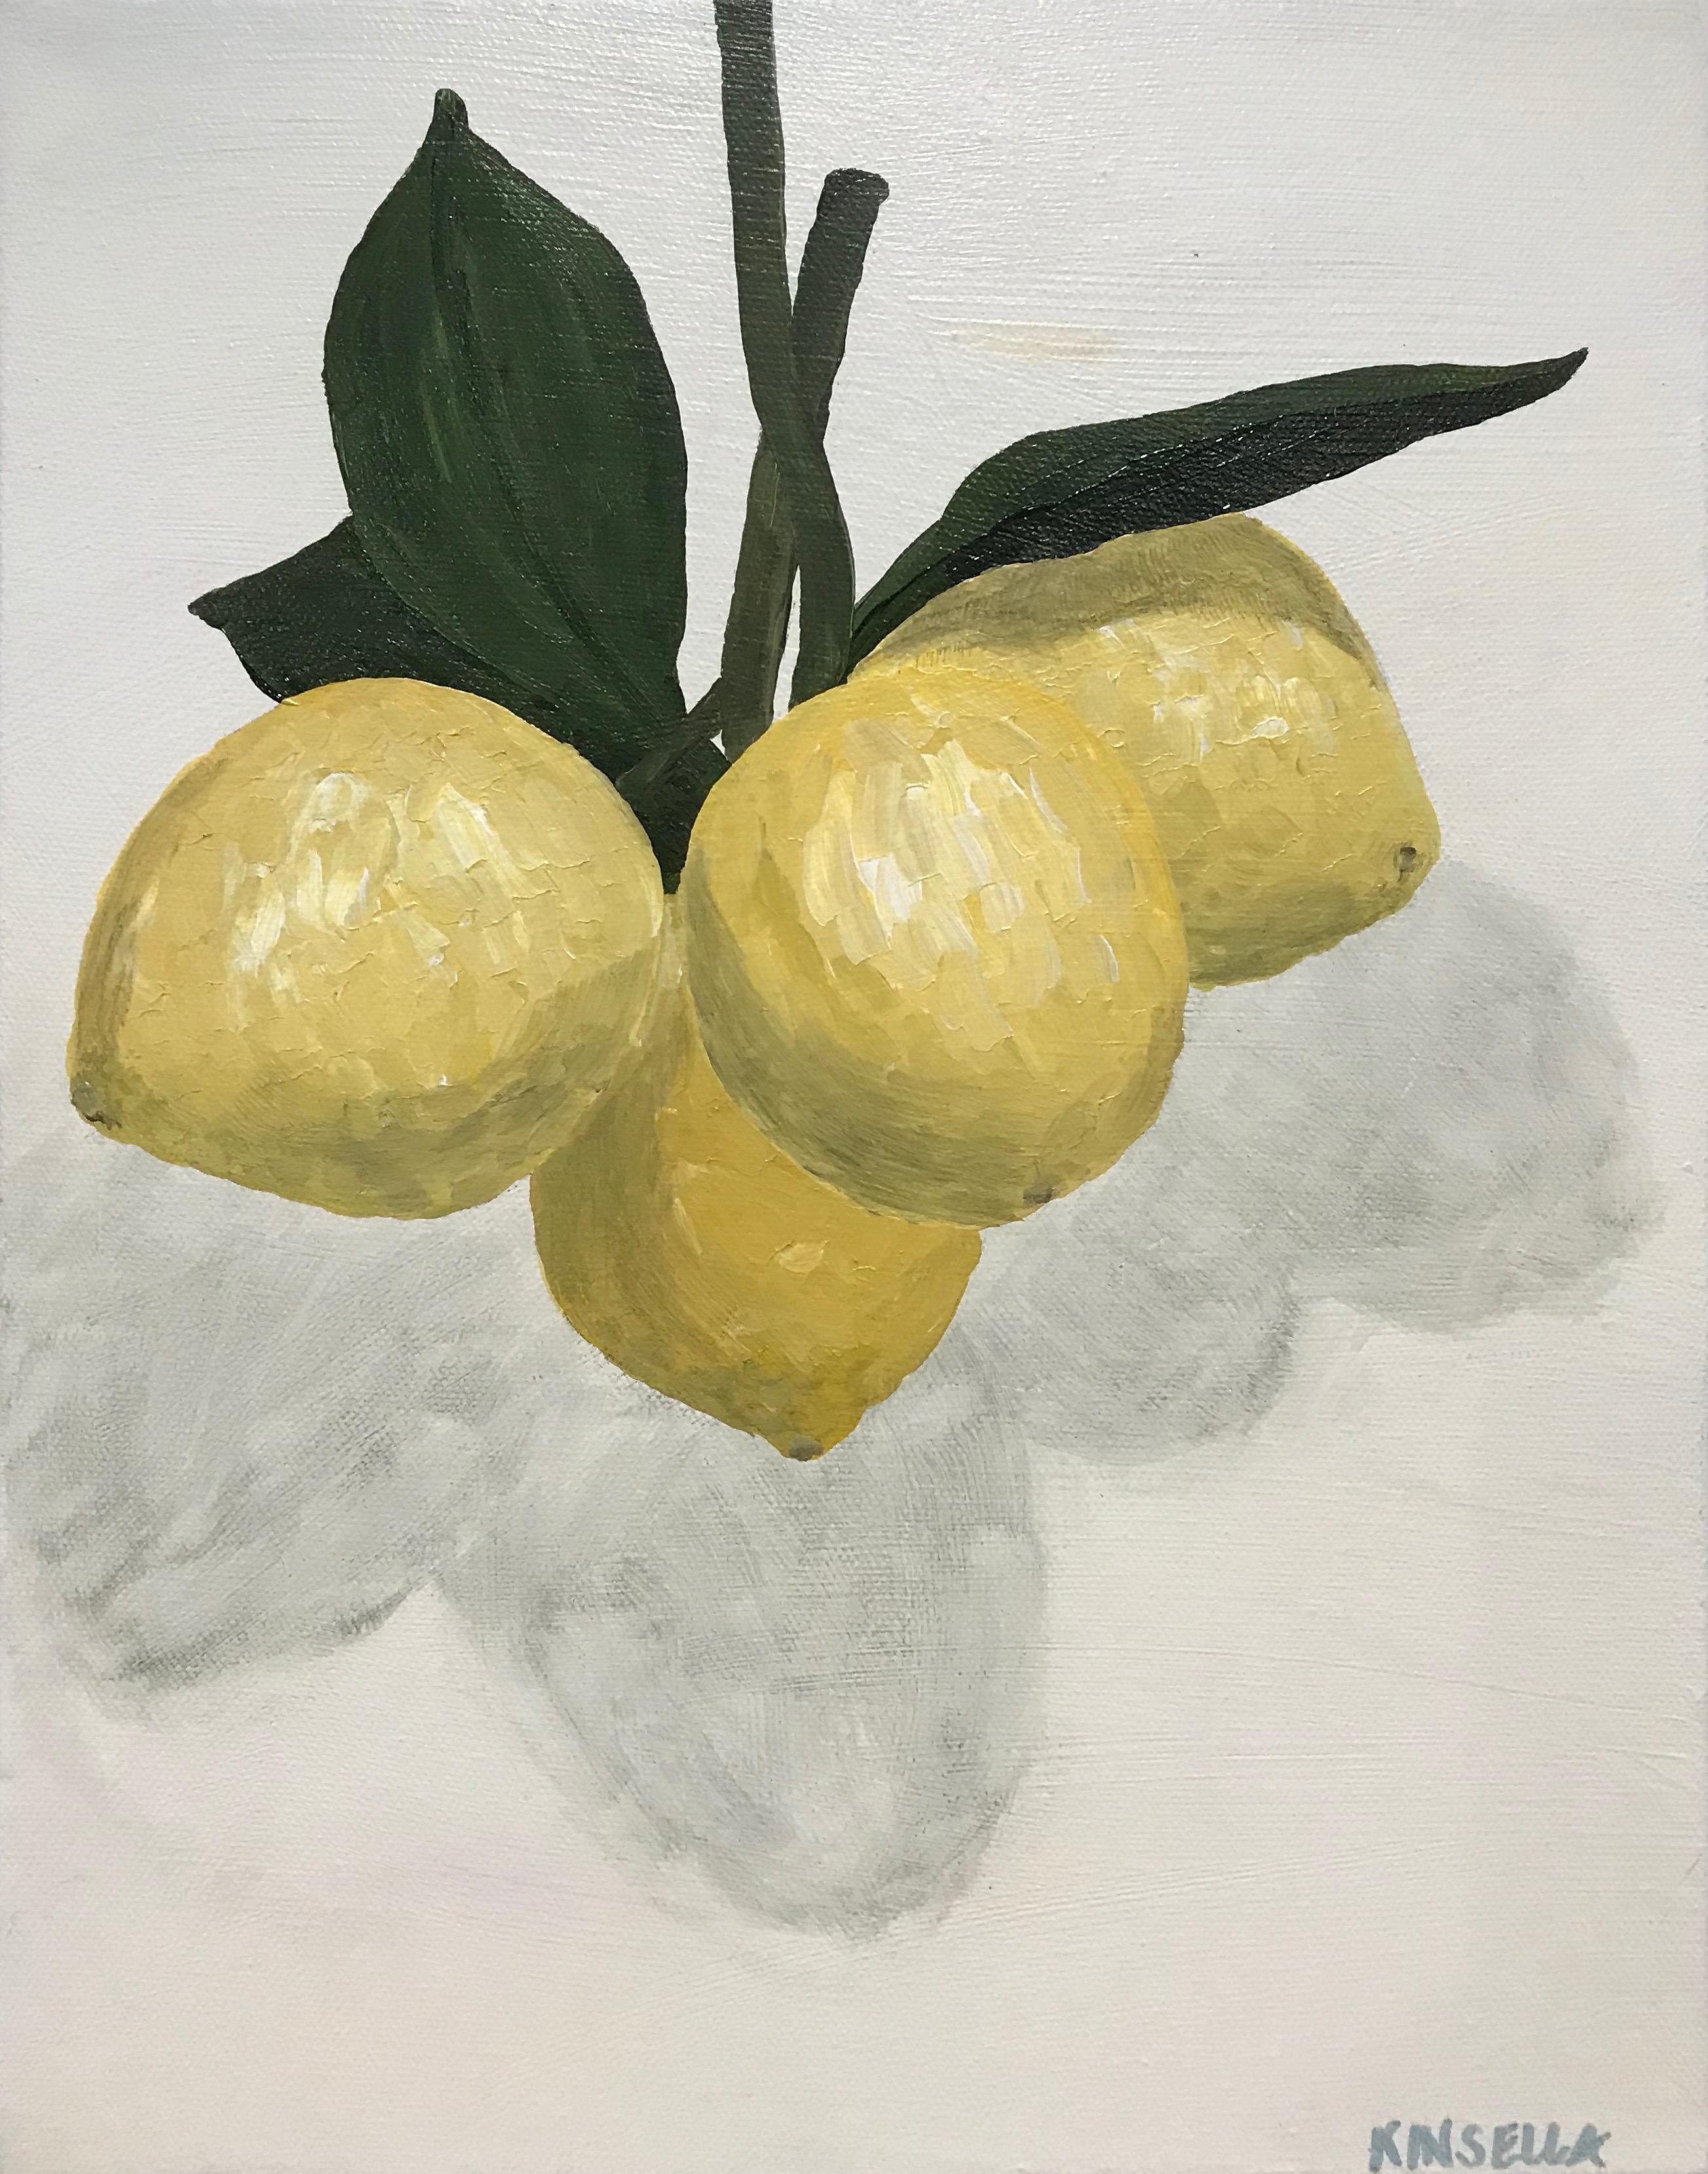 'Lemons Suspended' is a small vertical contemporary still-life acrylic on canvas painting created by American artist Susan Kinsella in 2018. Featuring a soft palette made of yellow and dark green standing out beautifully on a white background, the